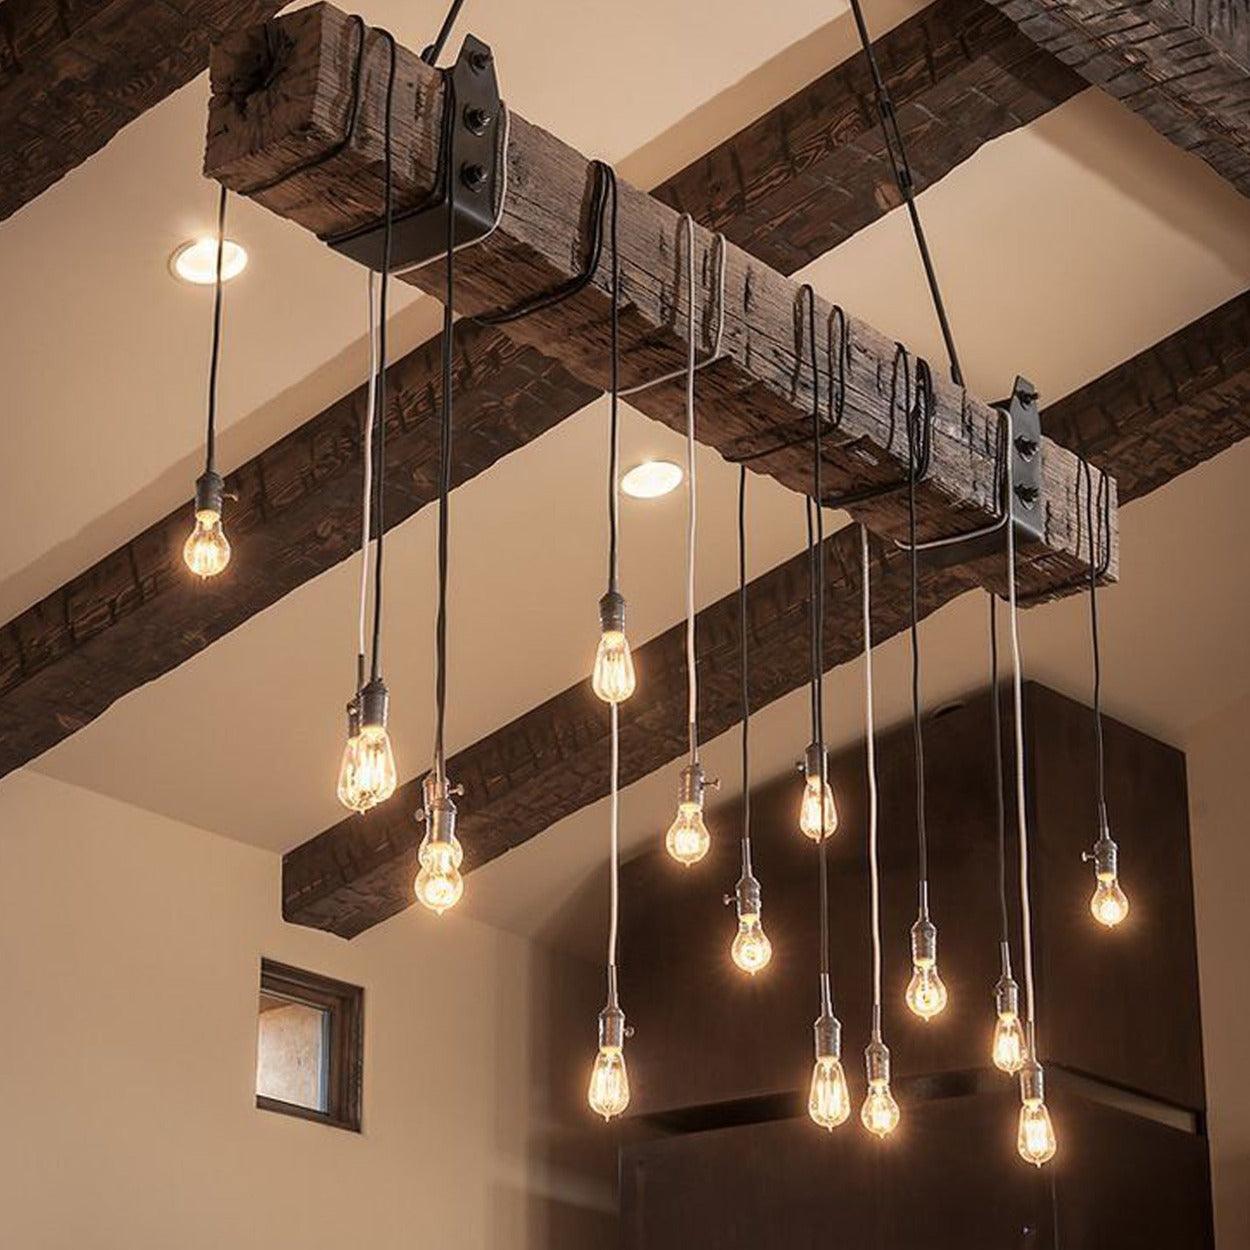 ANKUR WOODEN LOG ROPE HANGING VINTAGE CHANDELIER at the lowest price in  India.